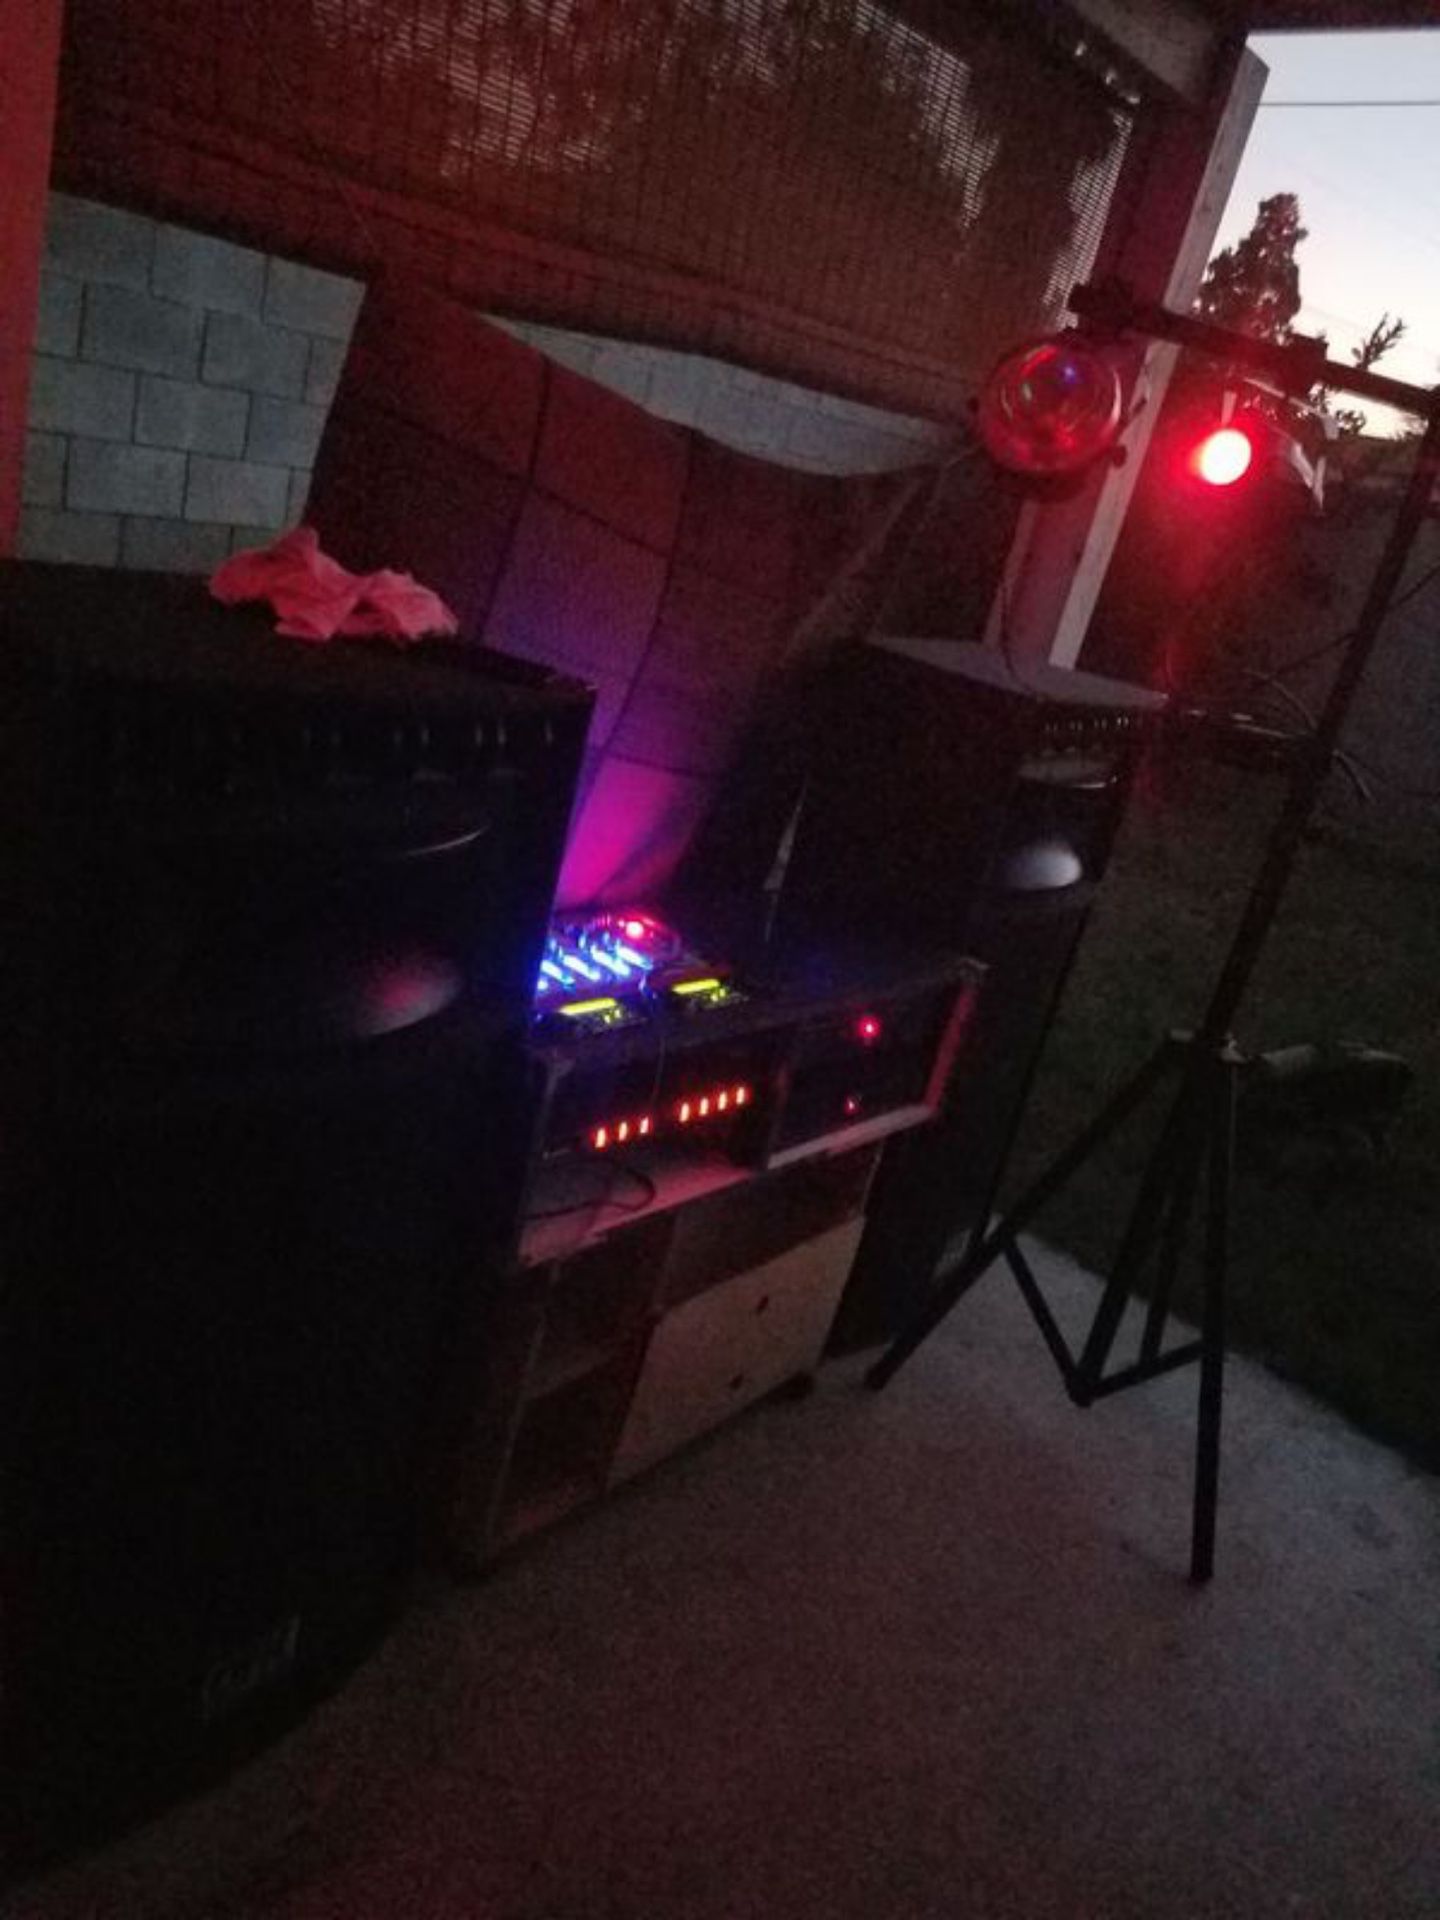 DJ Setup with Speakers, Strobe lights, and Mixer